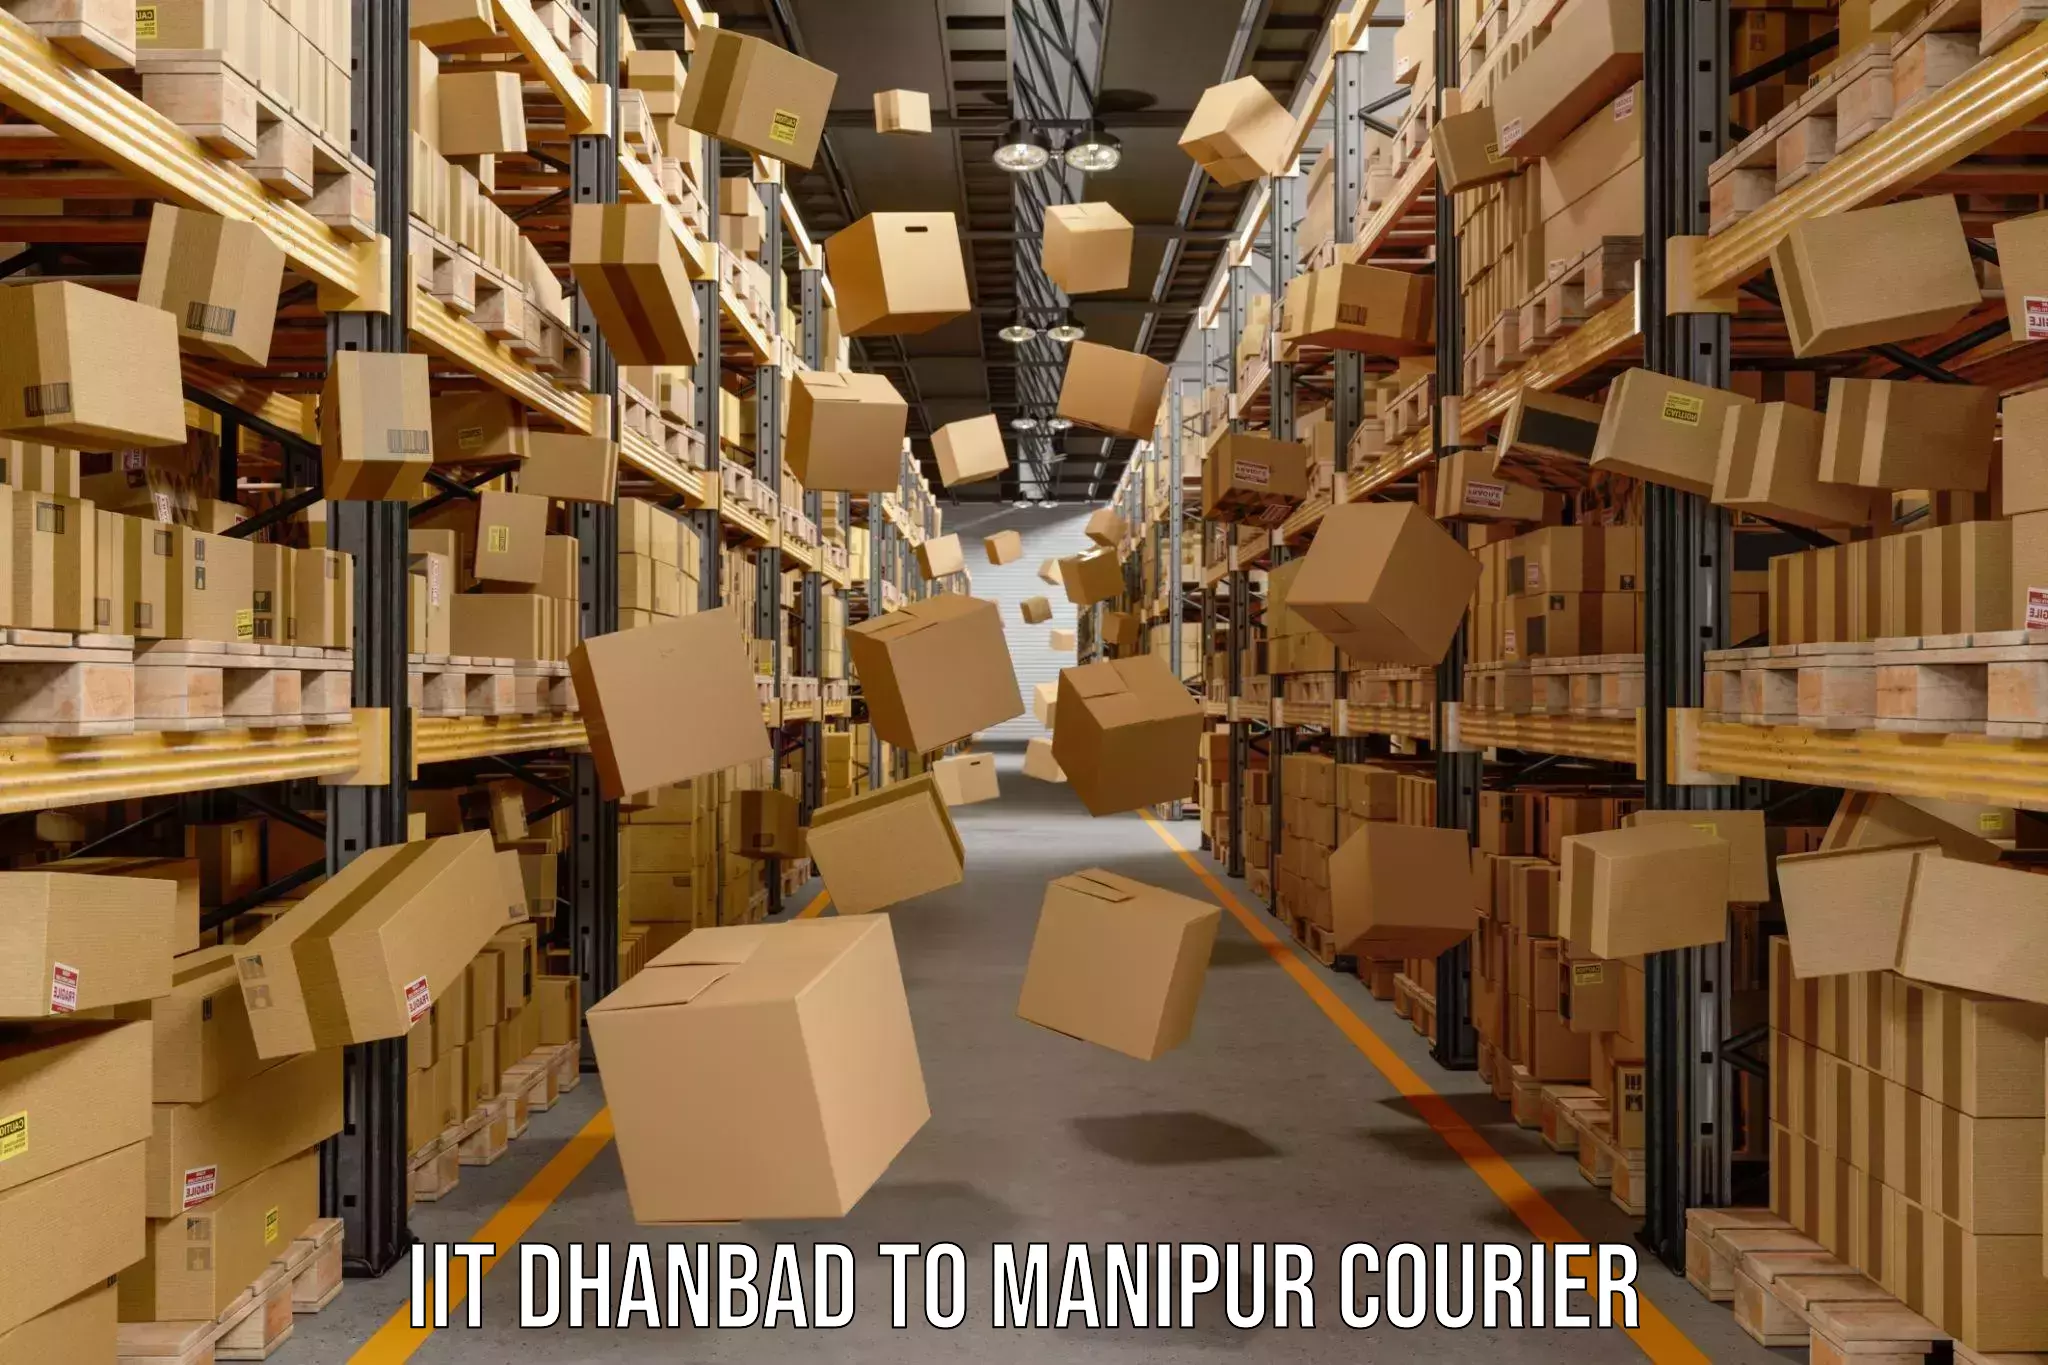 Courier service innovation in IIT Dhanbad to Imphal